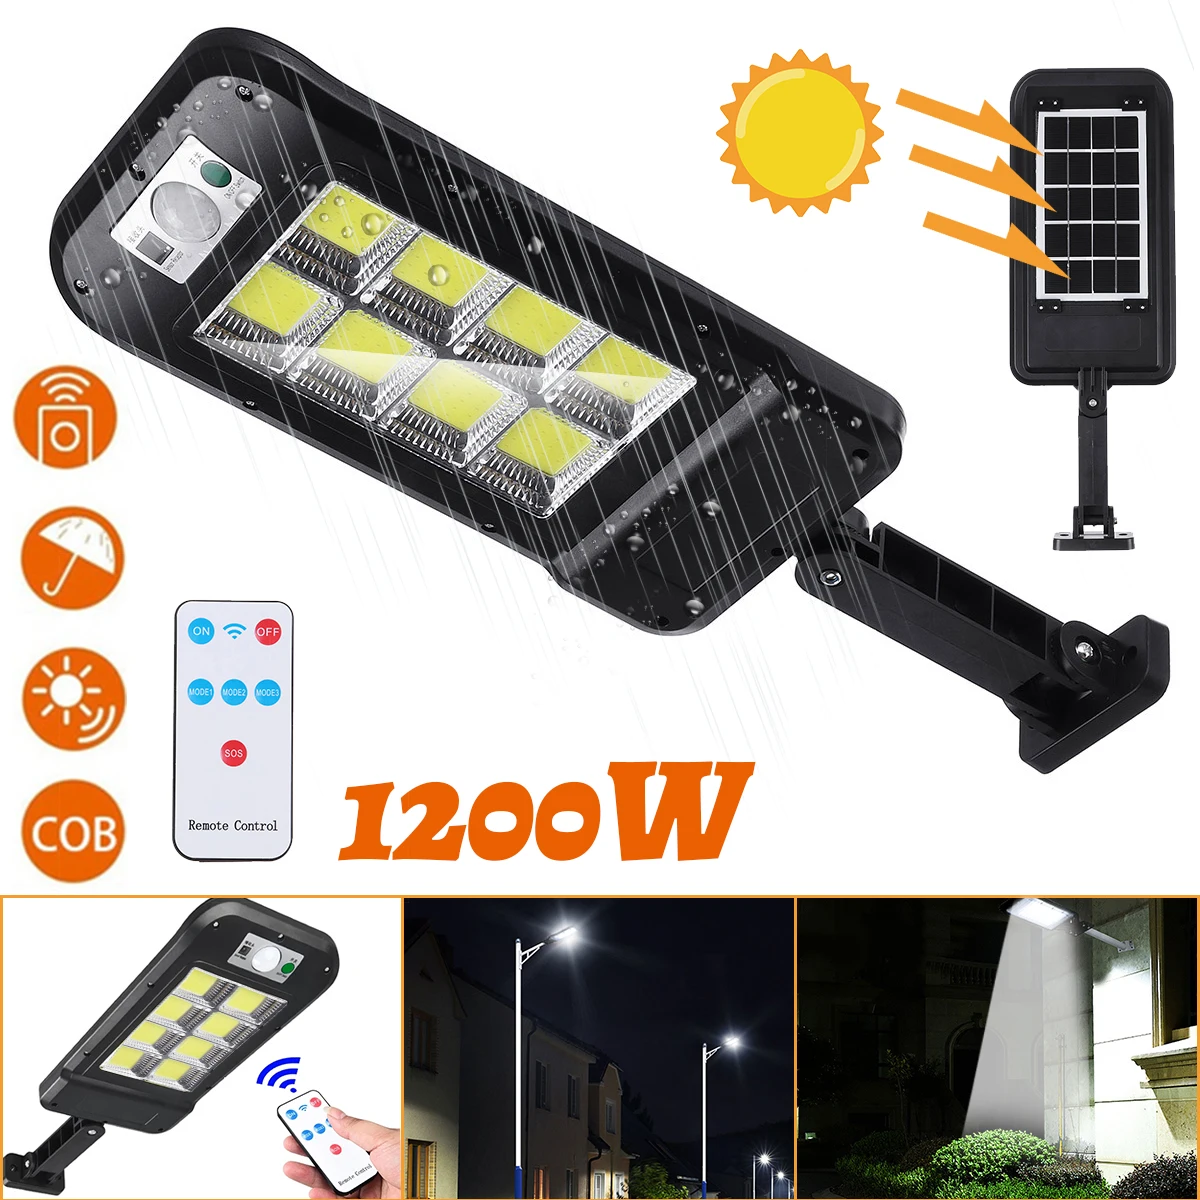 Details about   Double Head Outdoor Solar Panel Garden Lamp Remote Control IP65 16LED 260lm New 